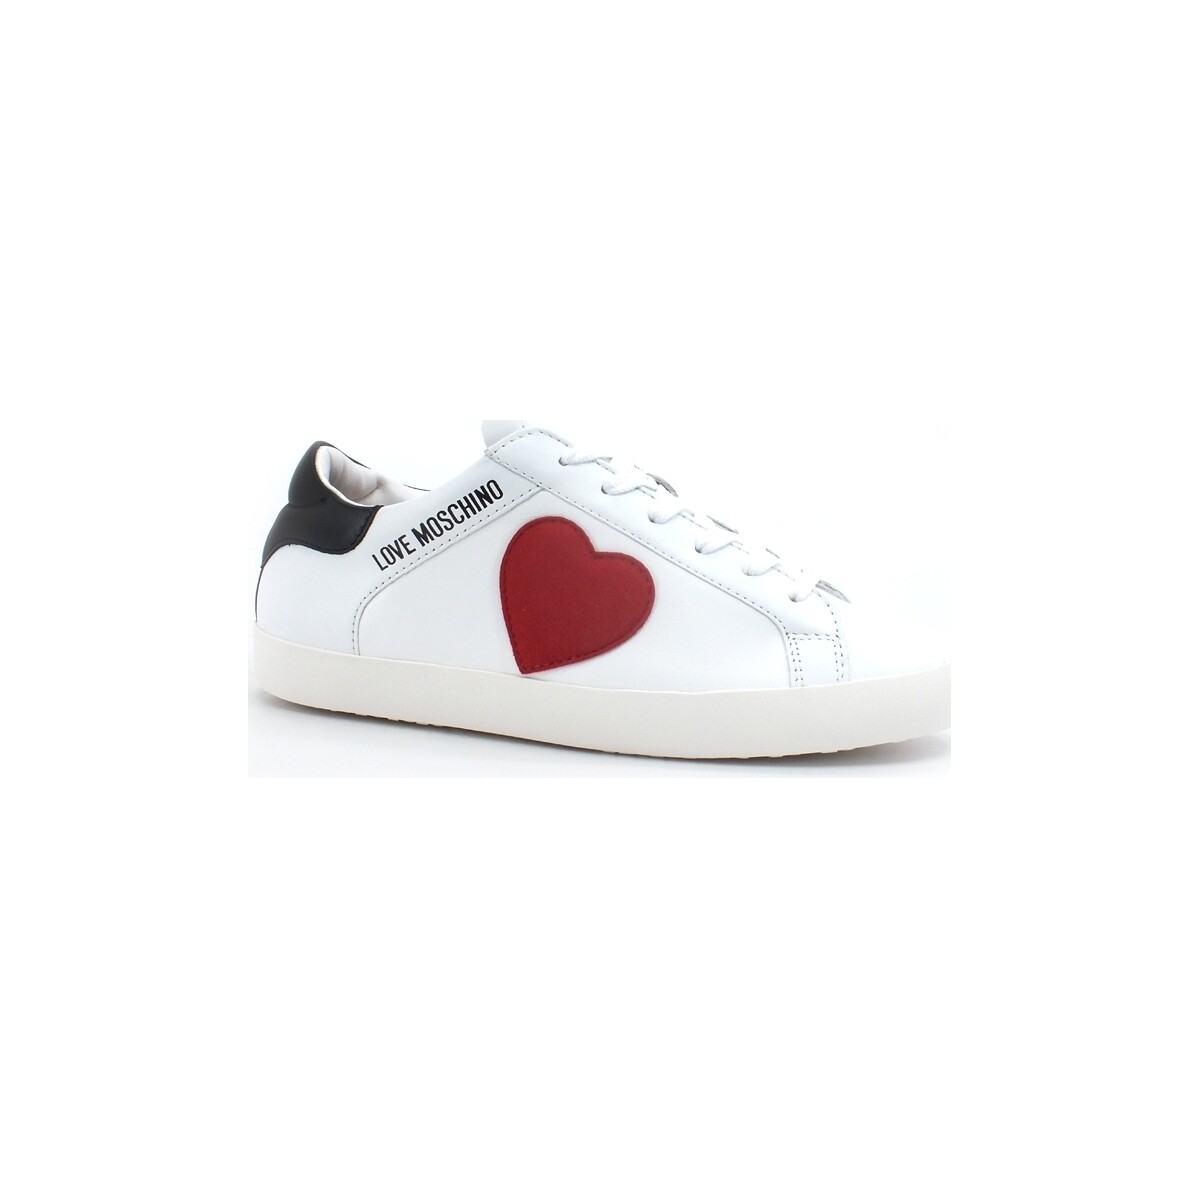 Chaussures Femme Bottes Love Moschino Sneaker Cuore Retro Bianco Rosso JA15402G1EI4310A Blanc